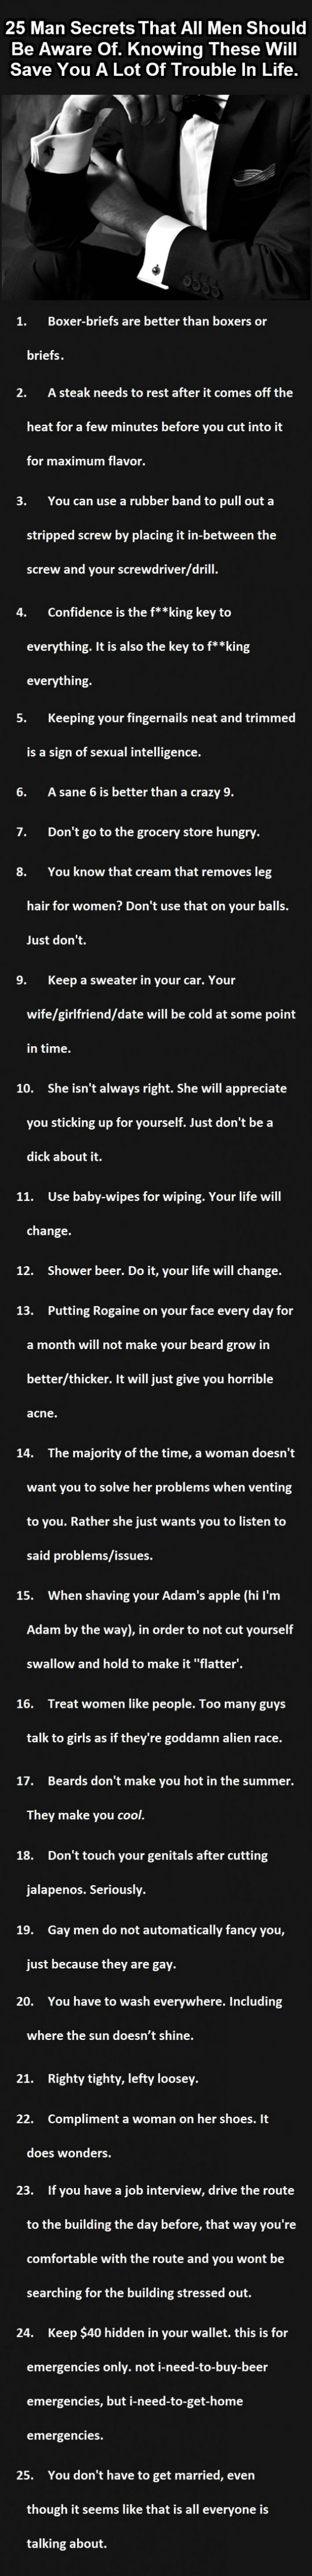 25 man secrets that all men should be aware of, knowing these will save you a lot of trouble in life